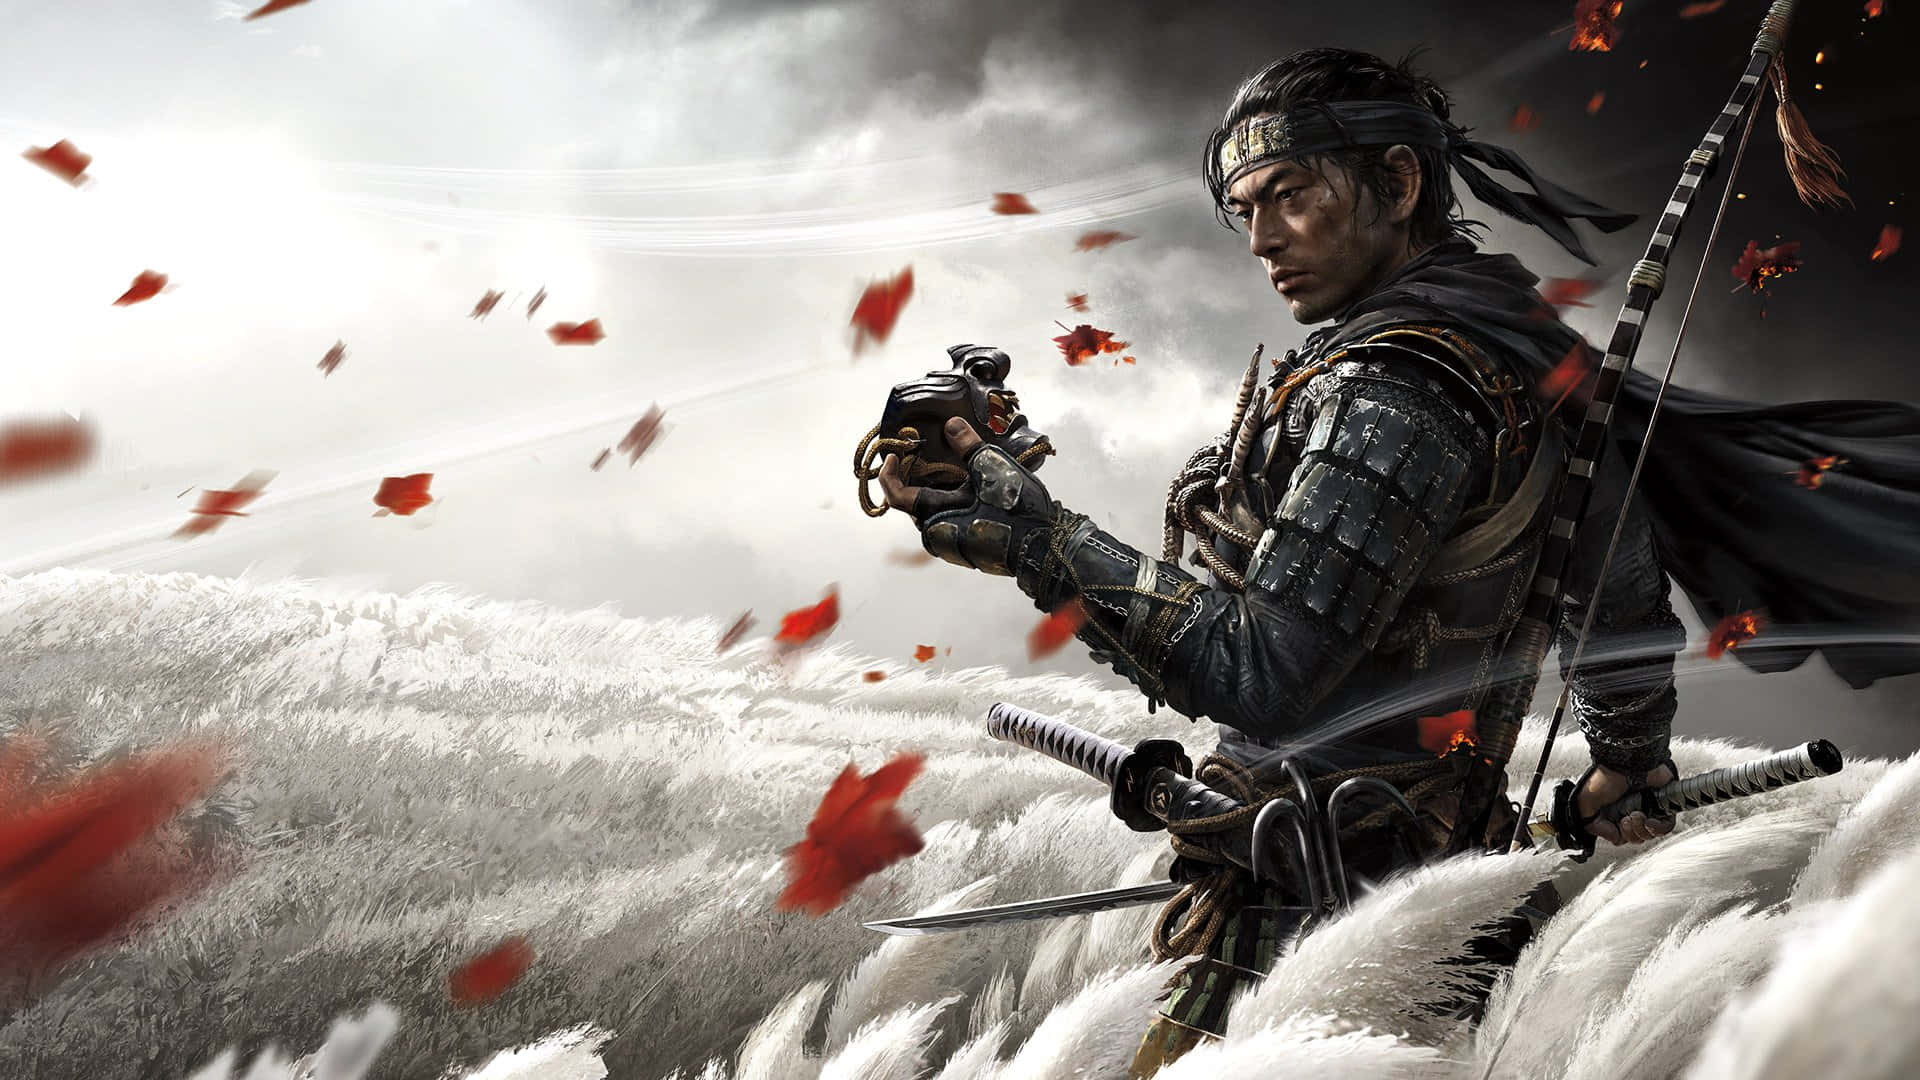 Be a Samurai, Join the Ghost of Tsushima